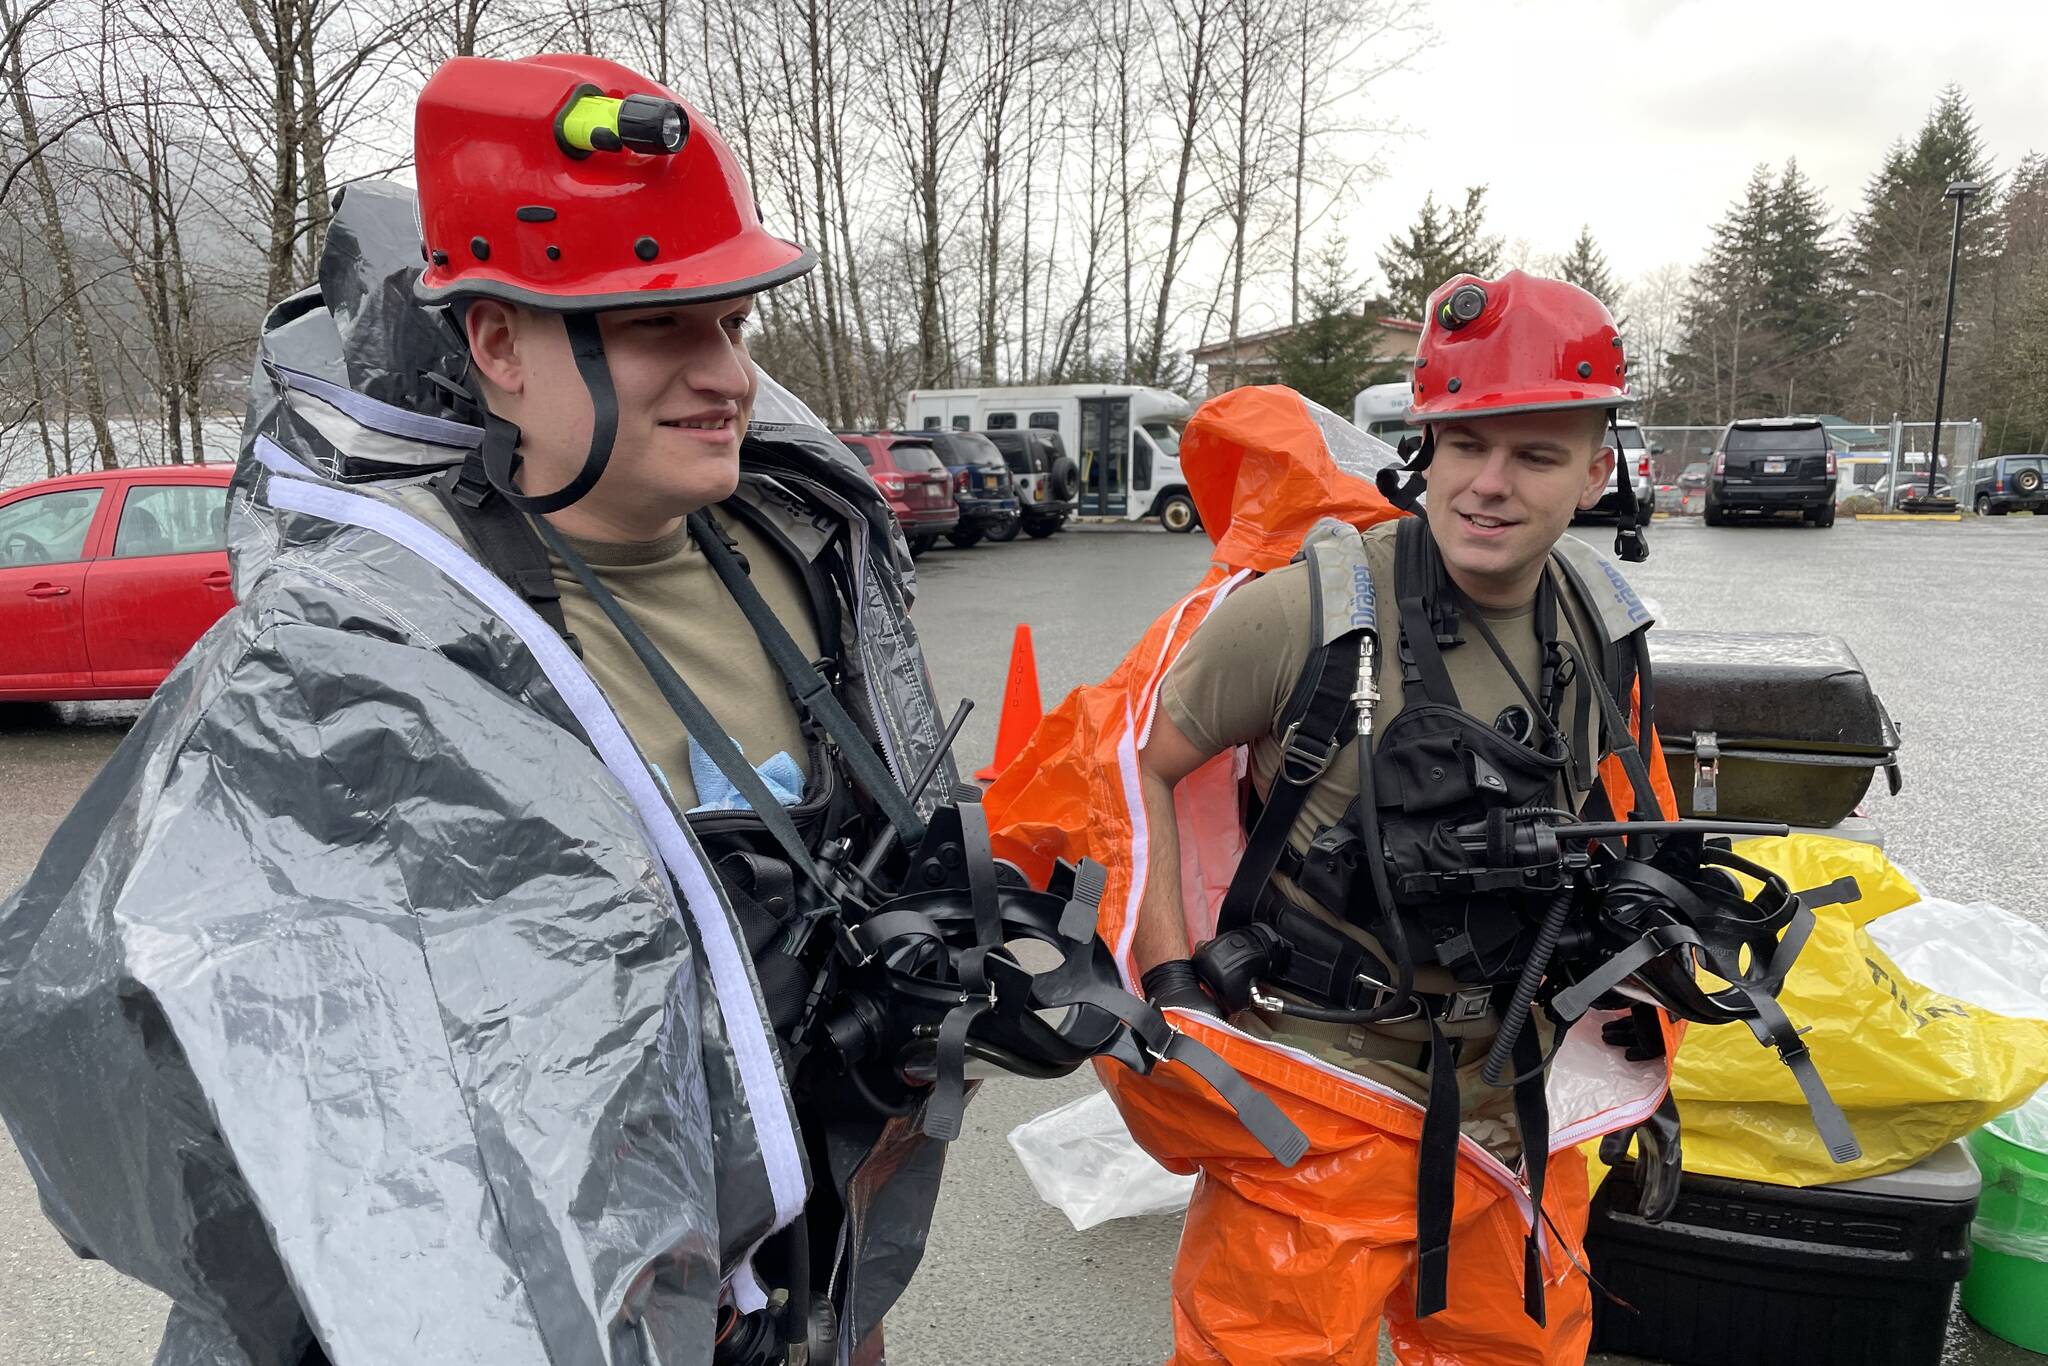 National Guardsmen Sgt. Andrew Hunt and Sgt. Jason Williams, survey team members for the 103rd Civil Support Team, suit up as they prepare to investigate a simulated hazardous material situation in an exercise with Juneau’s emergency organizations on march 22, 2022. (Michael S. Lockett / Juneau Empire)